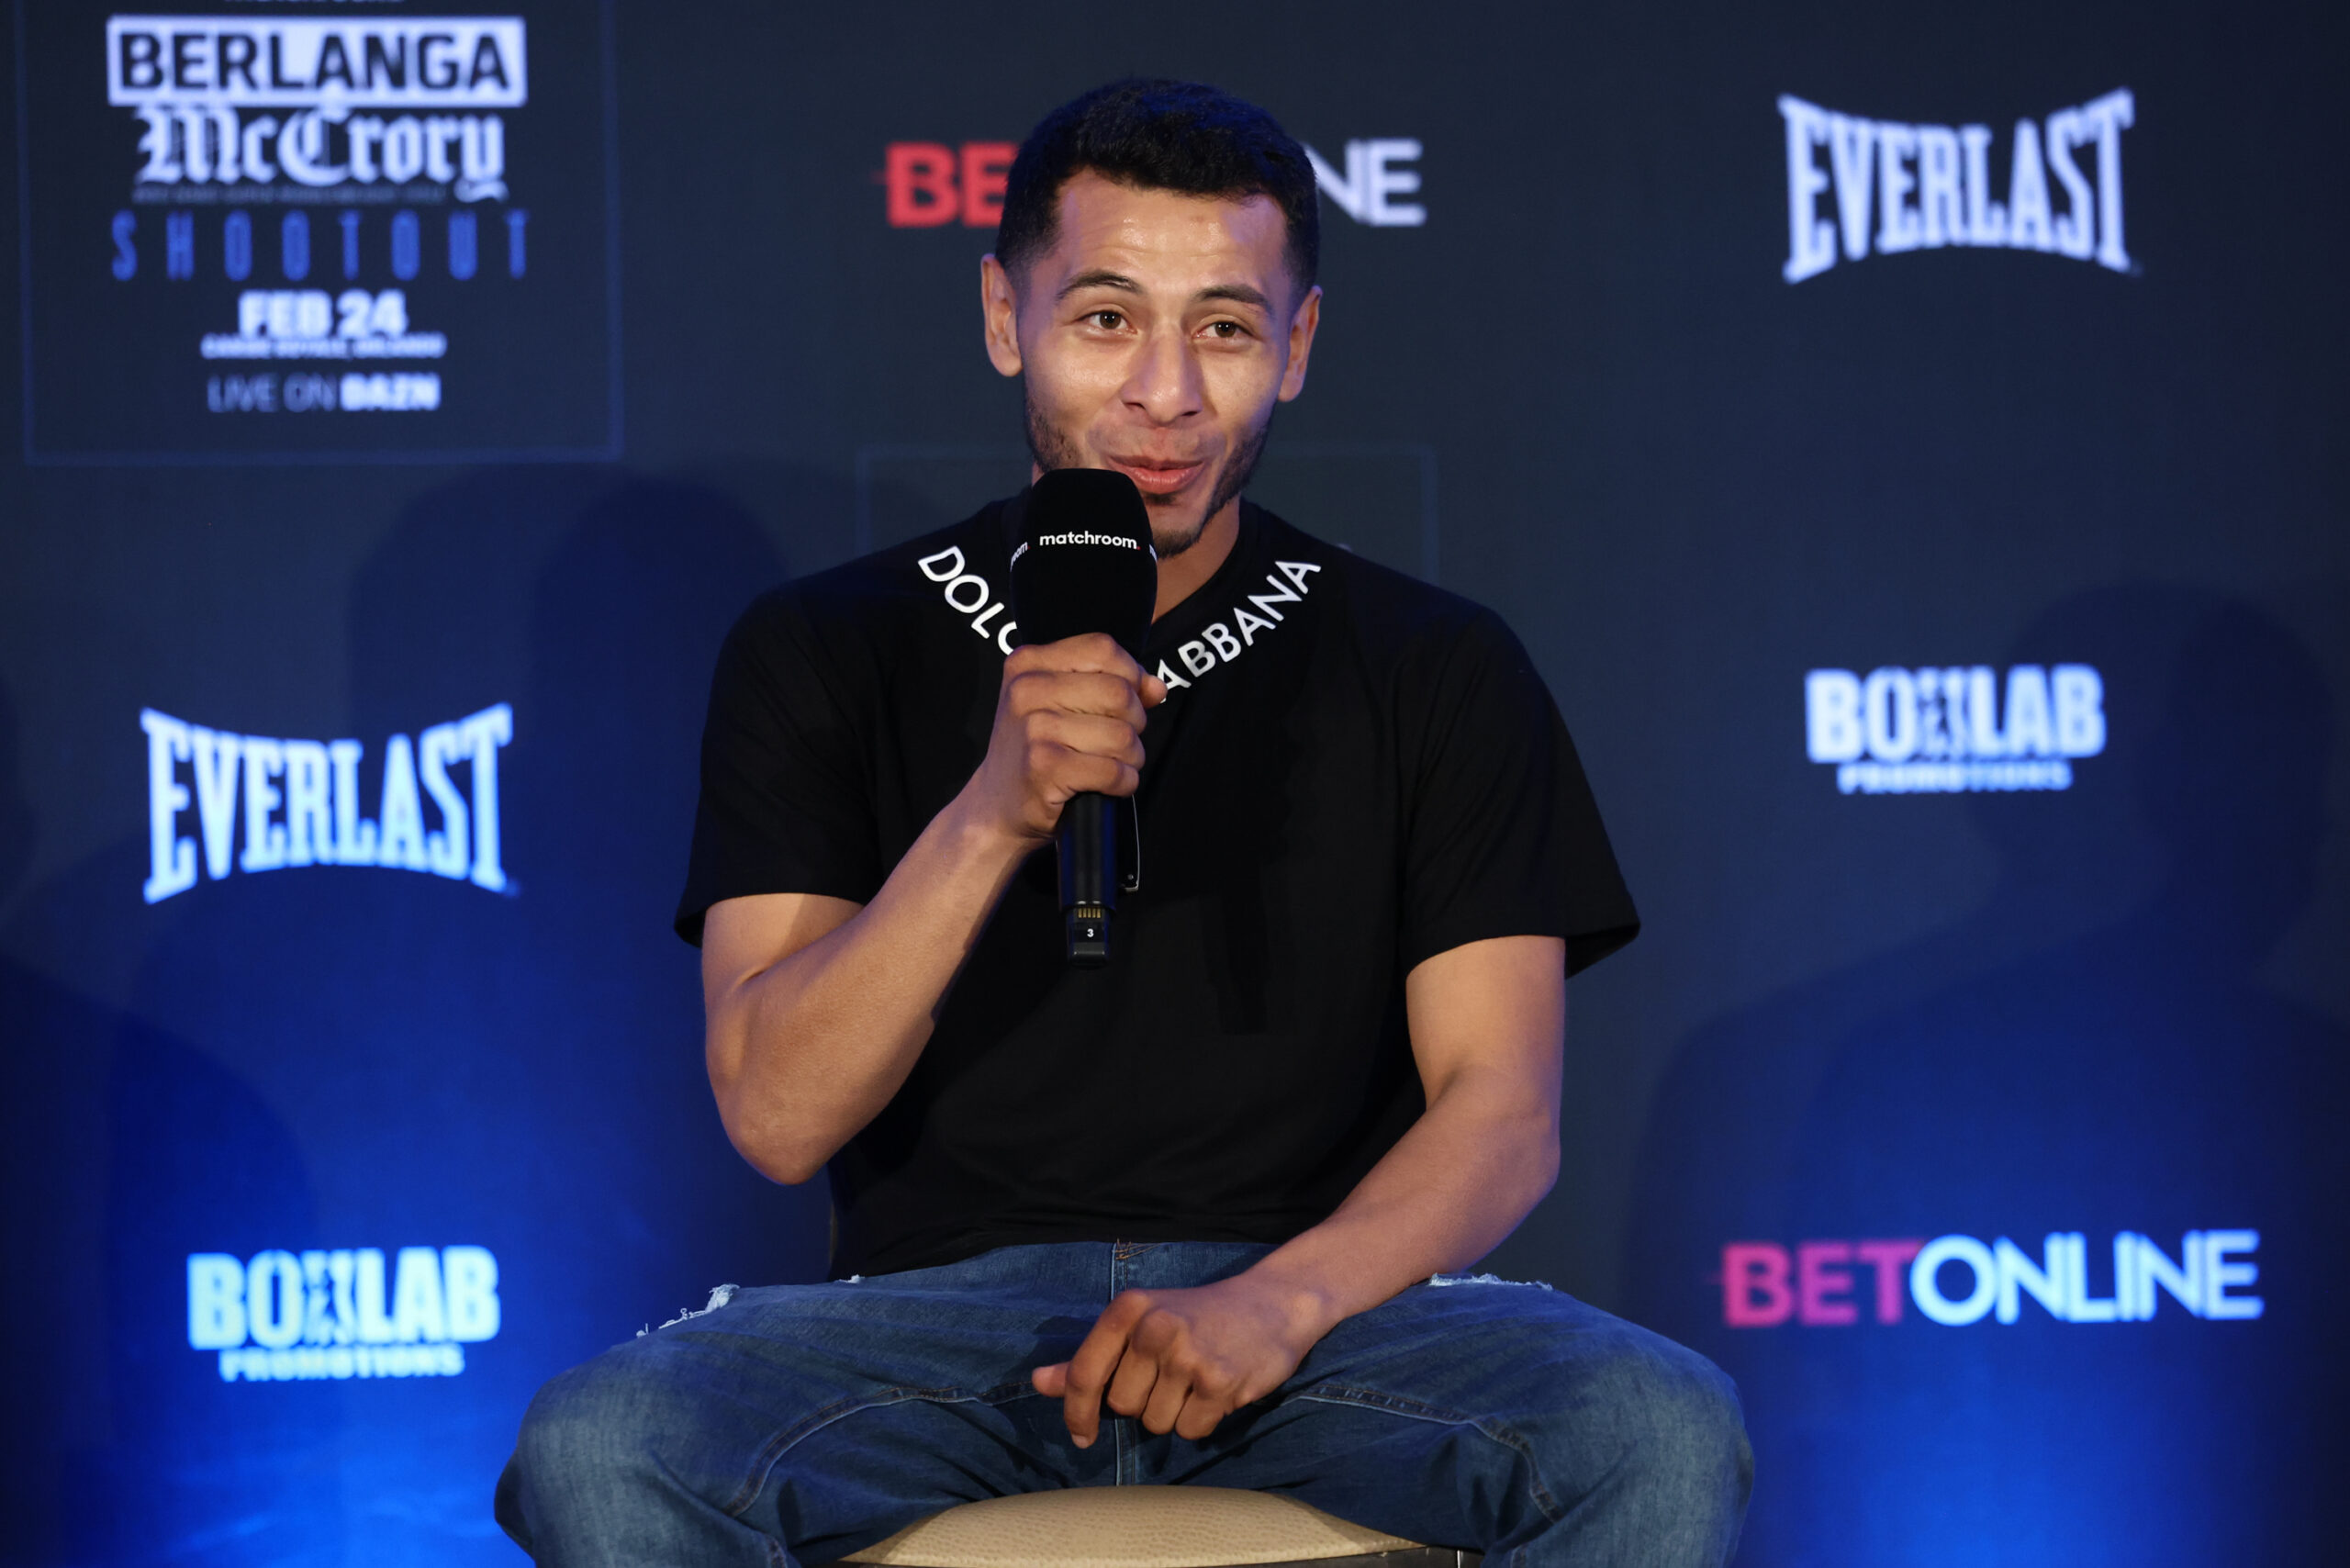 February 22, 2024; Orlando, FL; Brayan Zamarripa speaks at the final press conference for his February 24, 2024 fight in Orlando, FL. (Foto: Ed Mulholland/Matchroom).